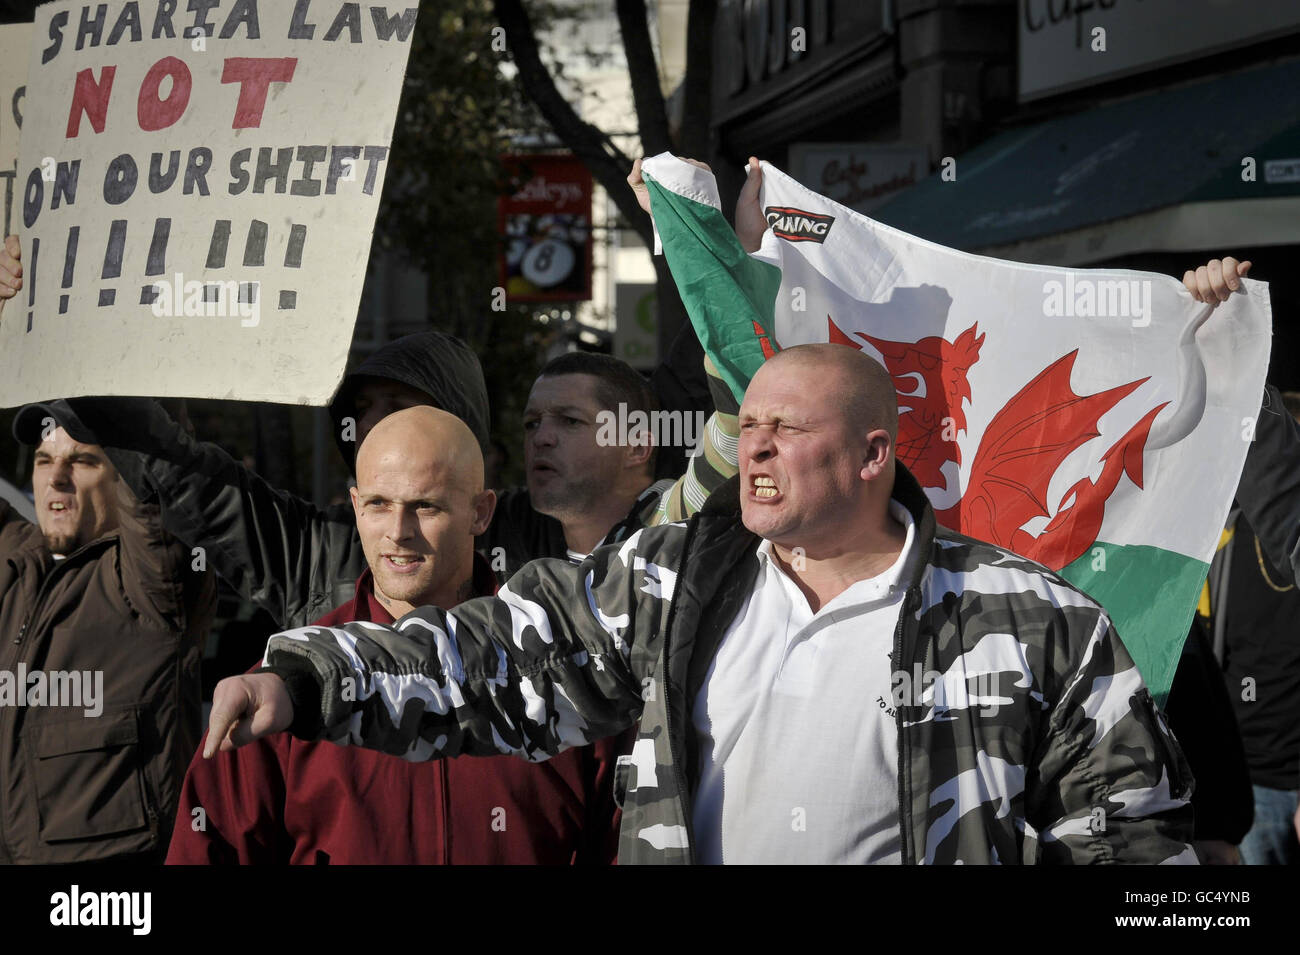 Welsh Defence League protesters chant back at the anti-fascism protesters as the two groups are kept apart by the police during a protest near Castle Square, Swansea, Wales. Stock Photo